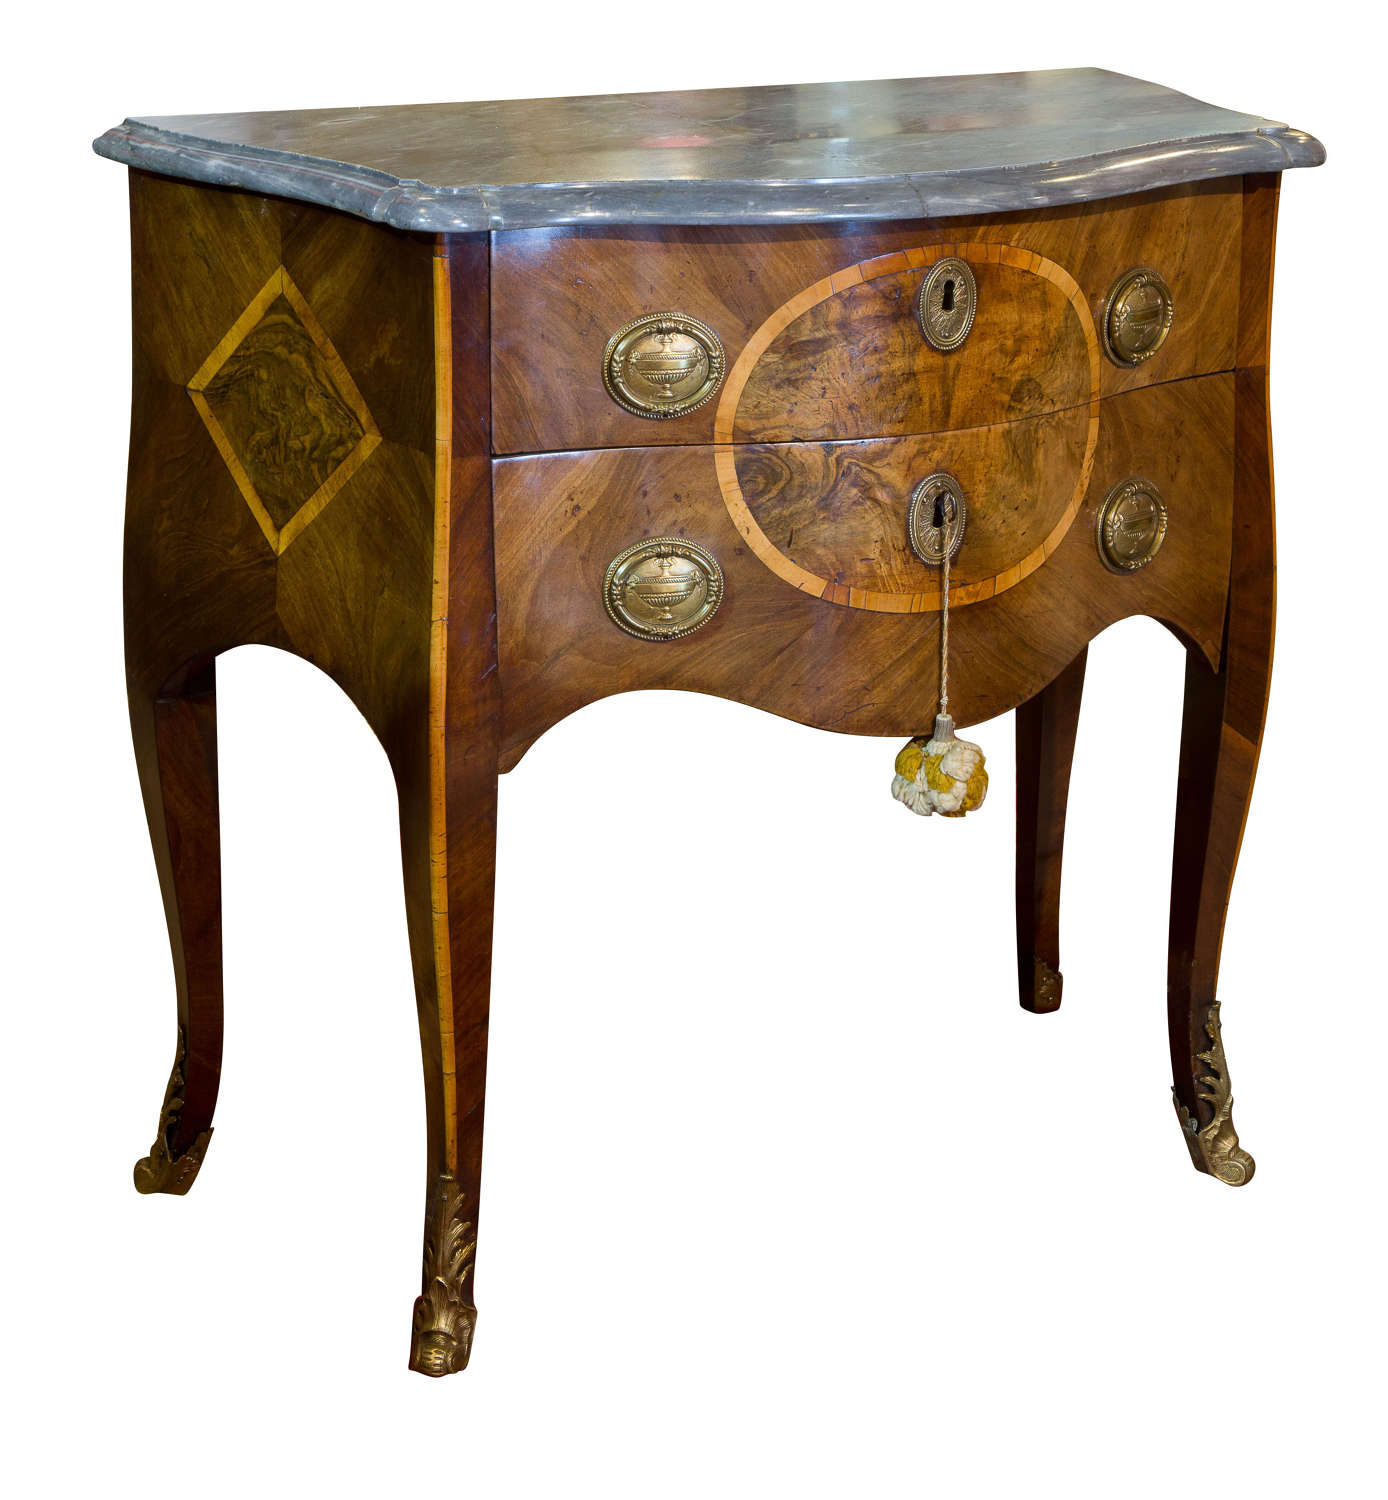 Late 18thc Italian serpentine fronted commode